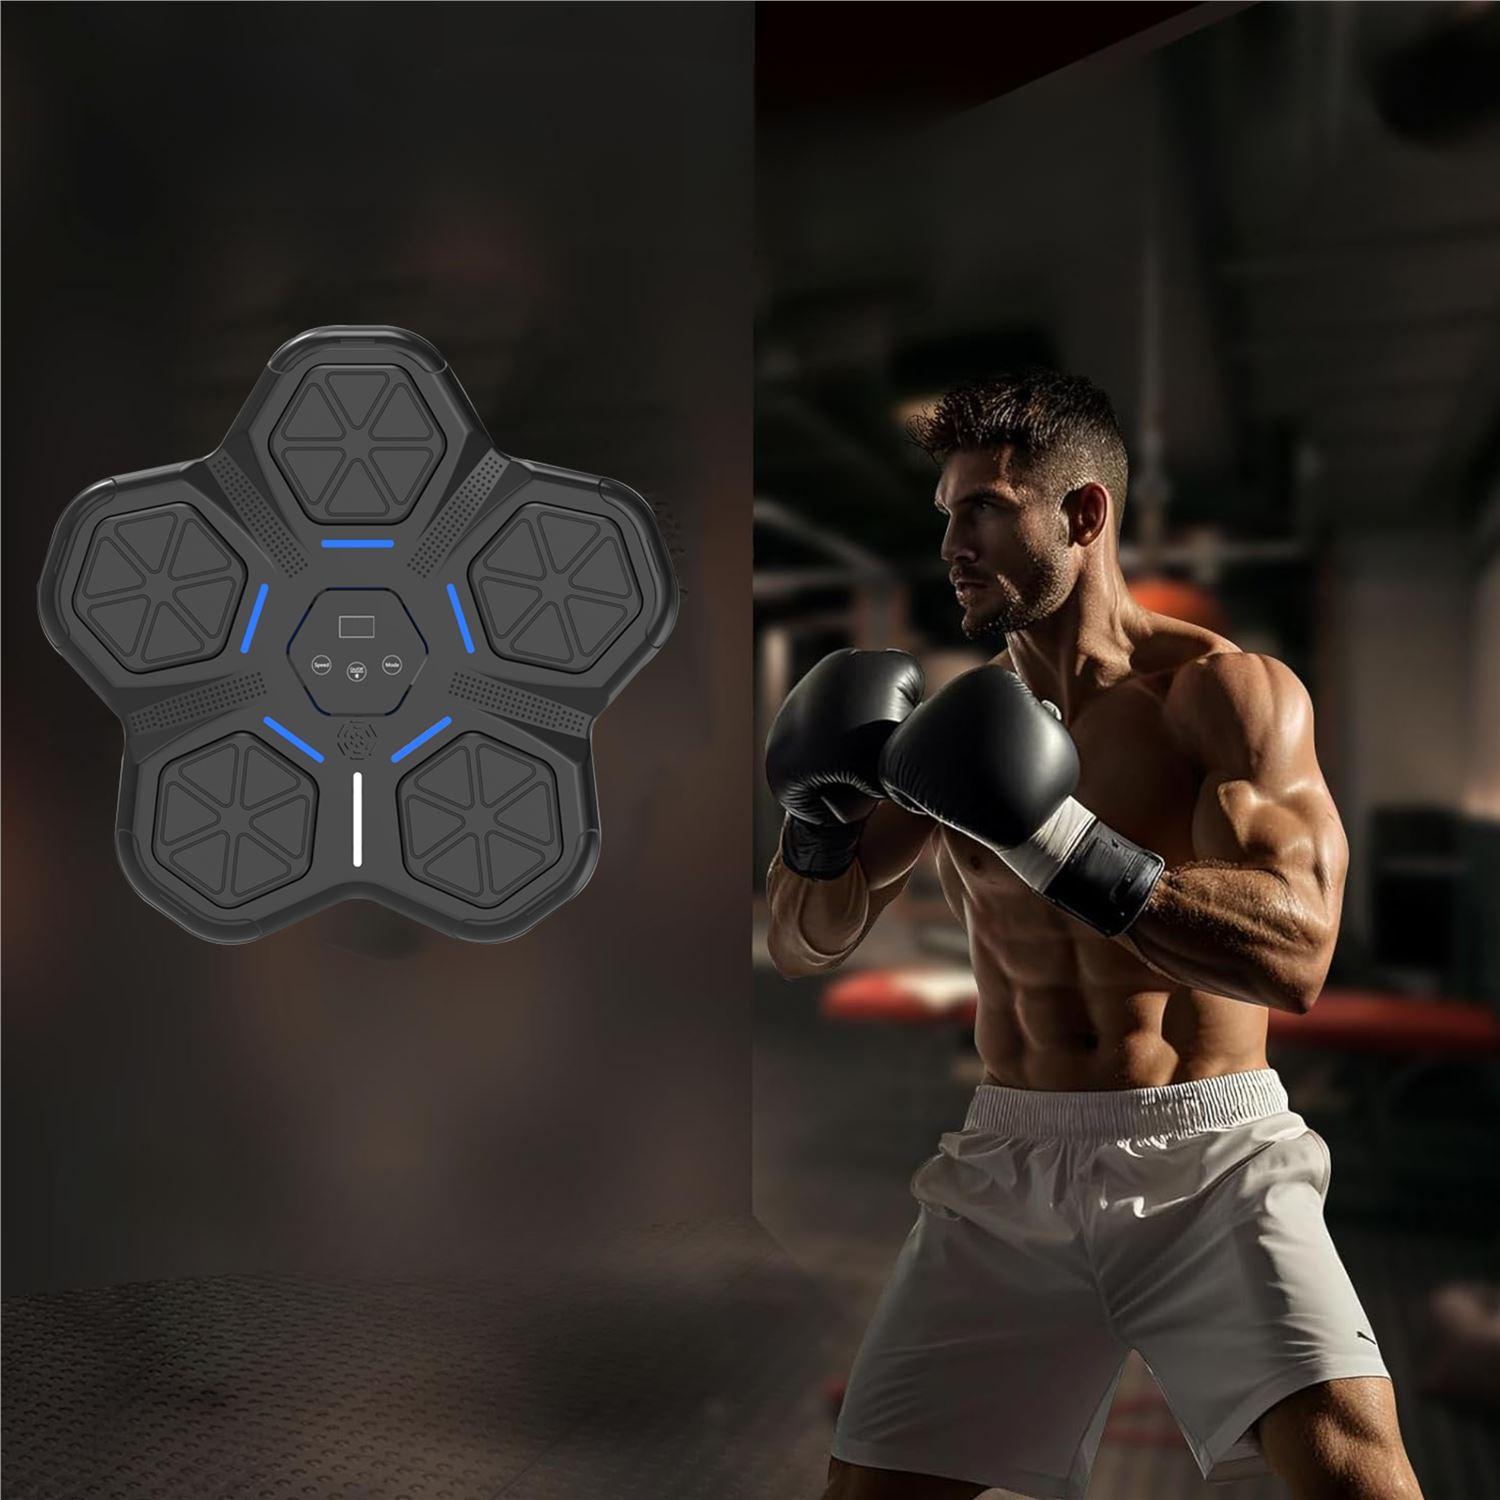 Music Boxing Machine: Interactive Boxing Target with Bluetooth